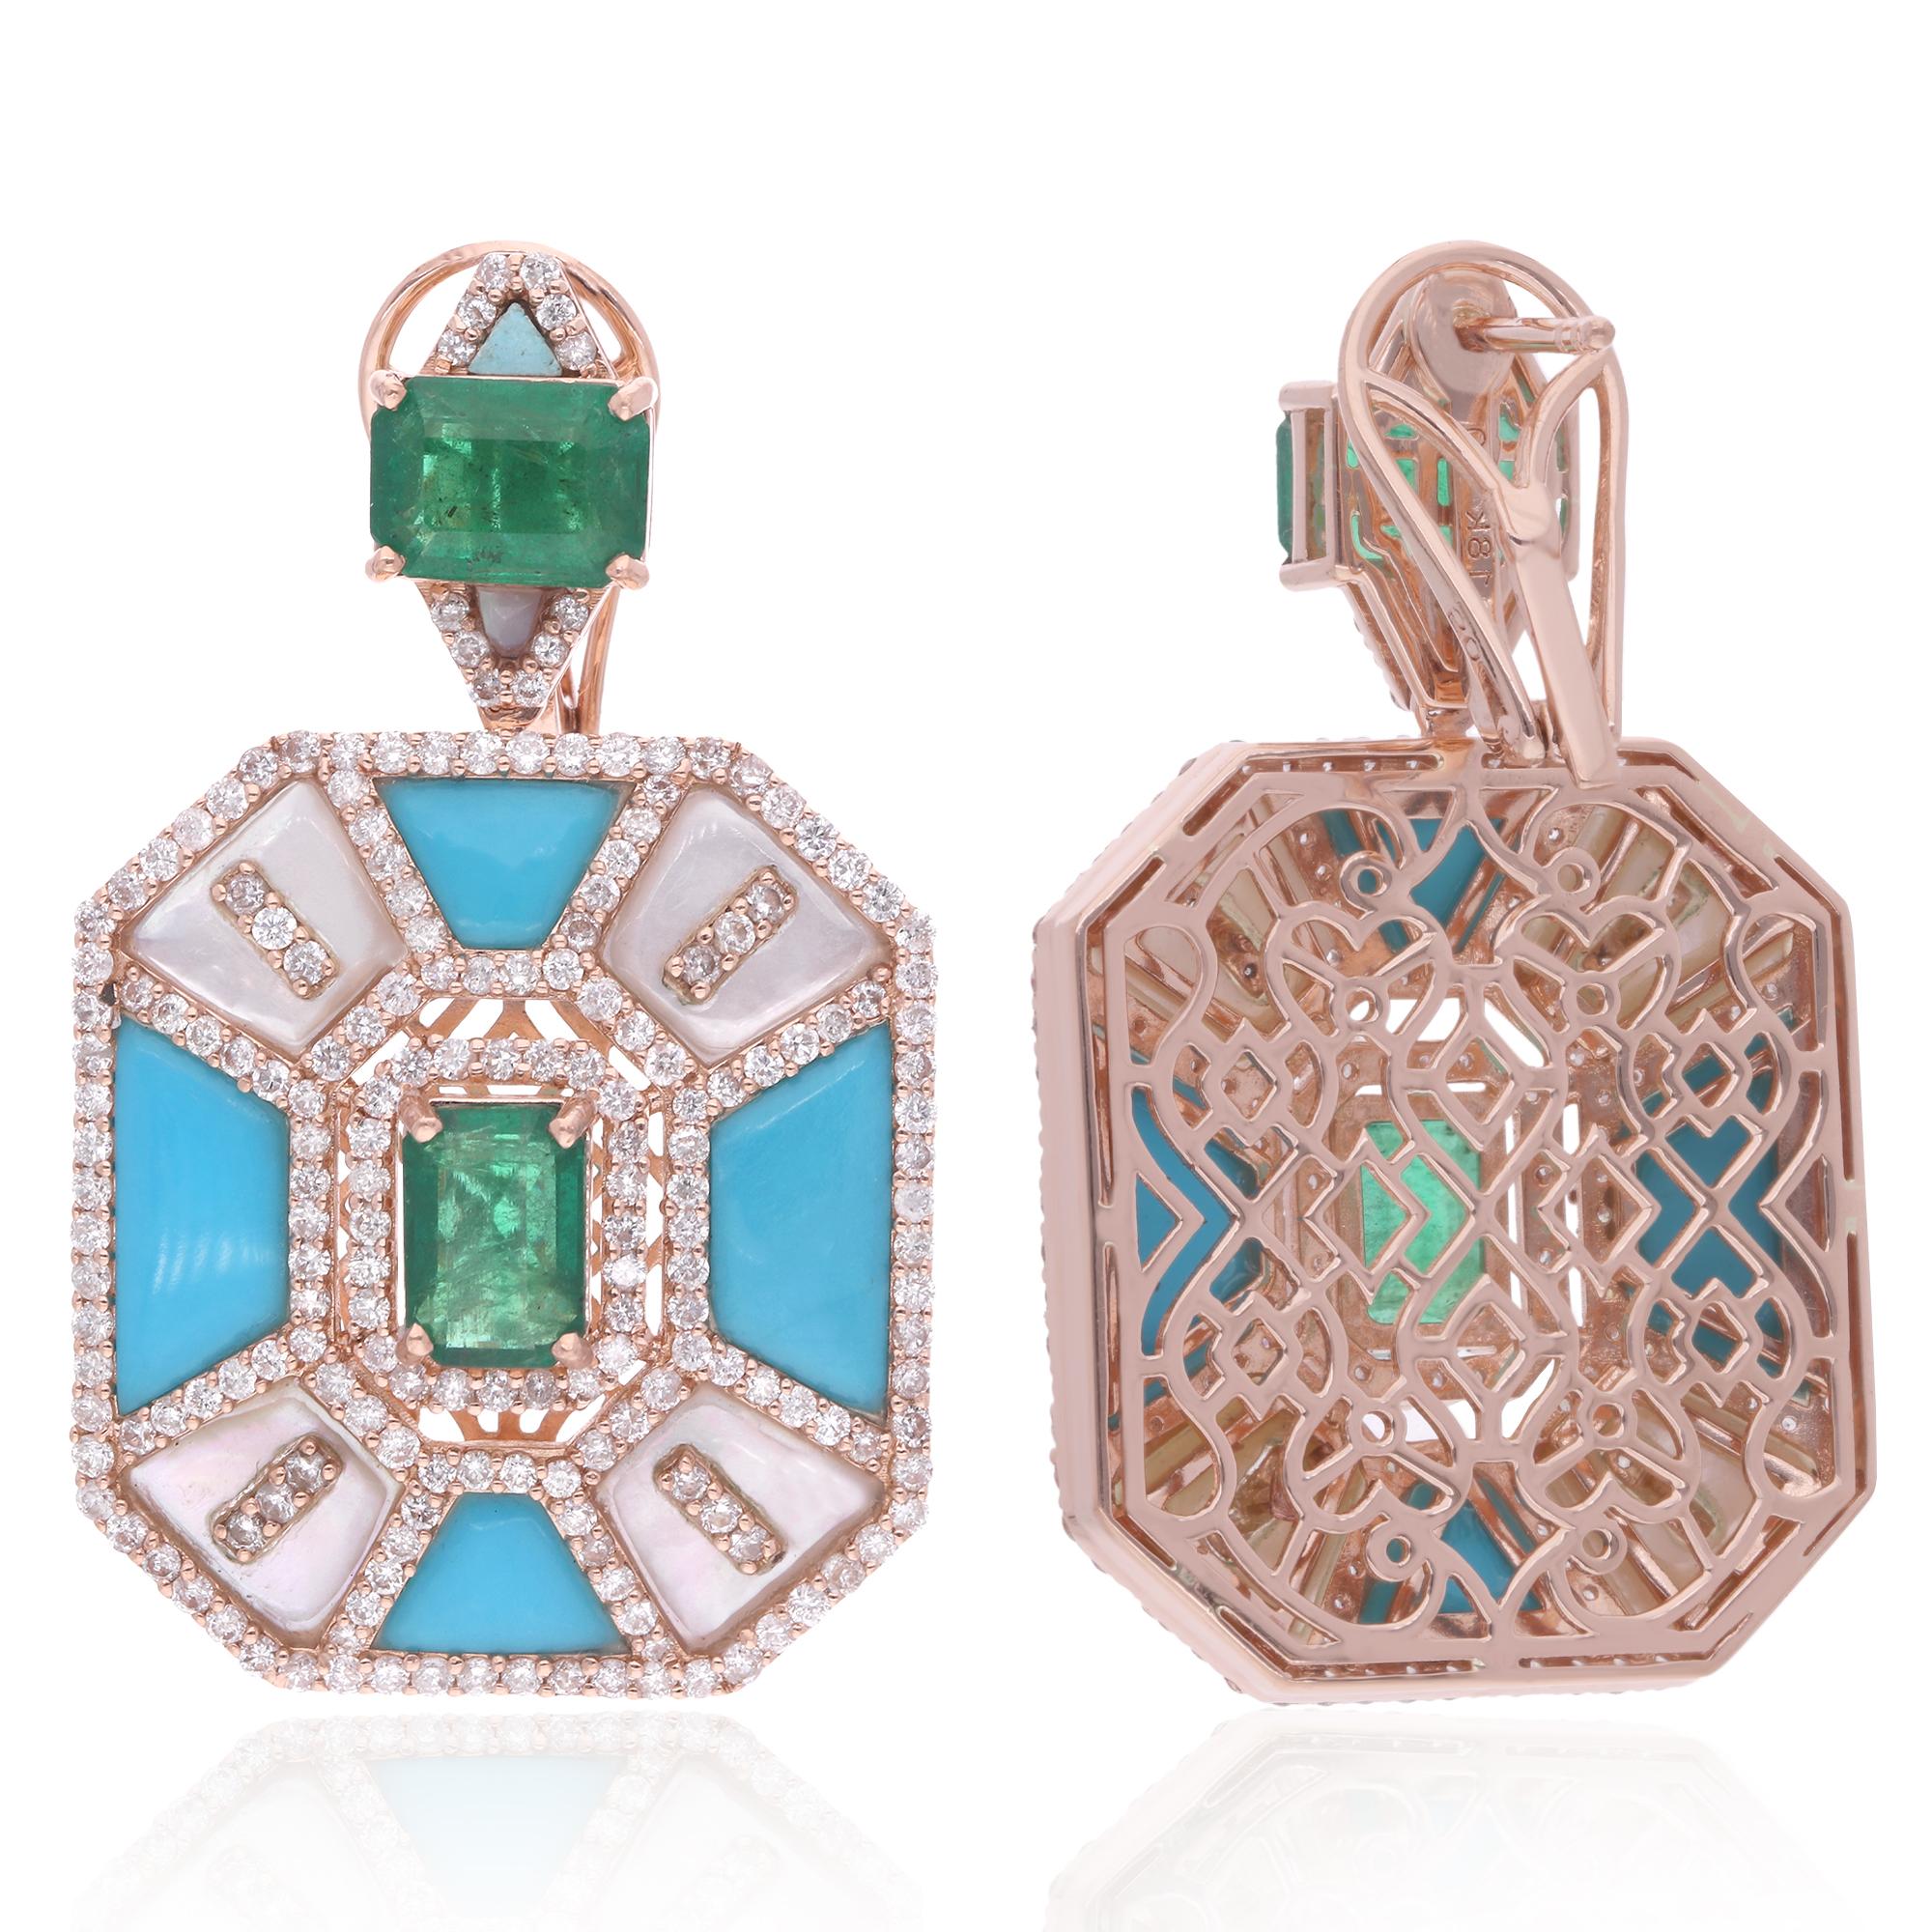 Elevate your style with these enchanting emerald turquoise dangle earrings adorned with mother of pearl and diamonds, gracefully crafted in 14 karat rose gold. These earrings exude an air of elegance and sophistication, blending the natural allure